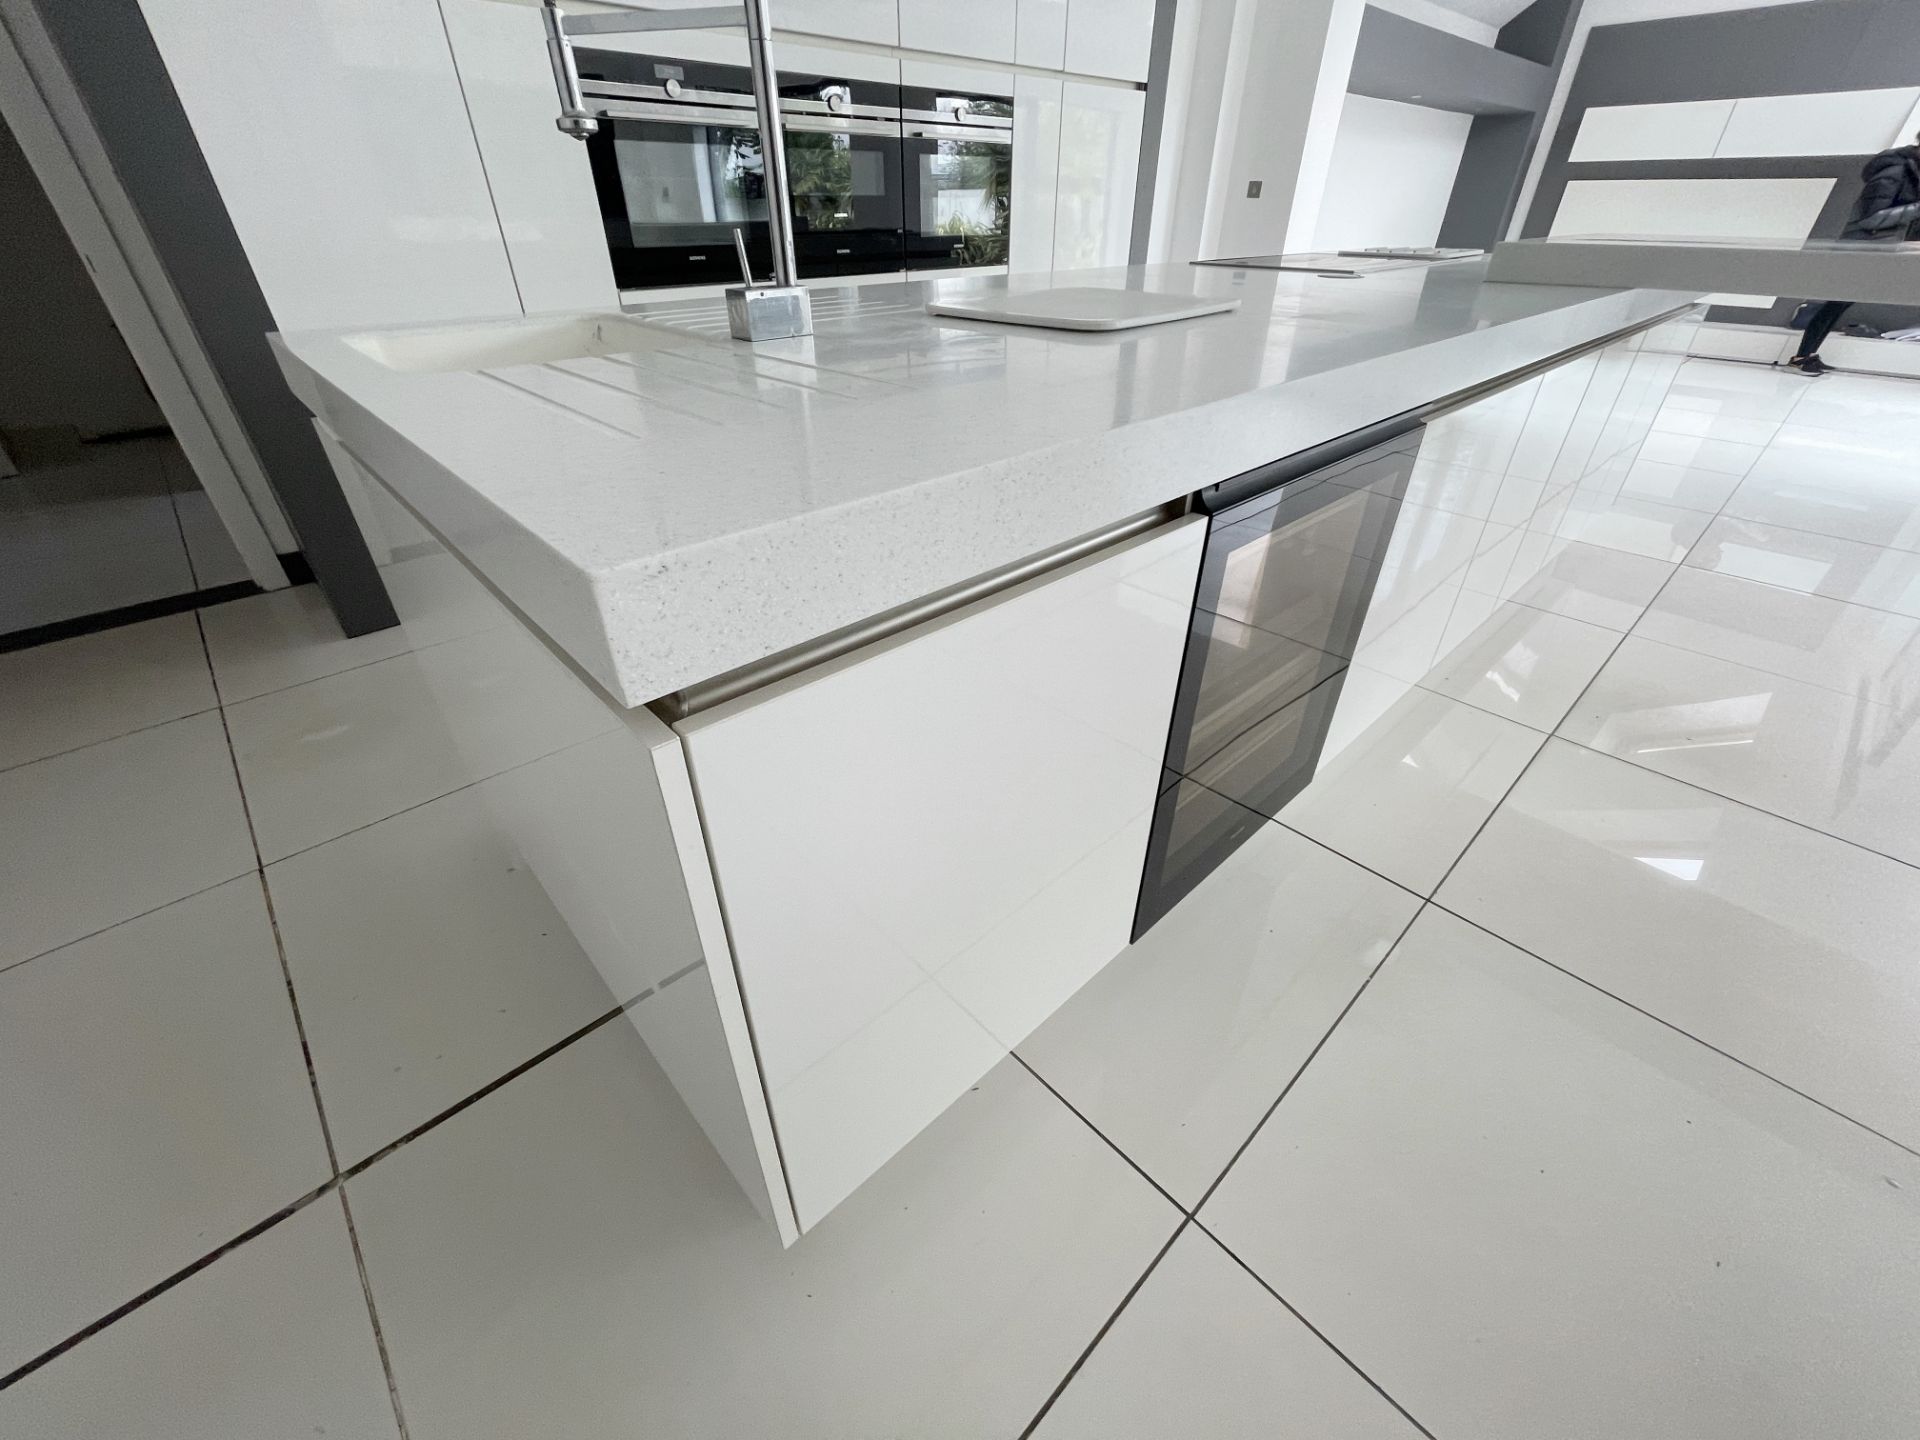 1 x SieMatic Contemporary Fitted Kitchen With Branded Appliances, Central Island + Corian Worktops - Image 12 of 100